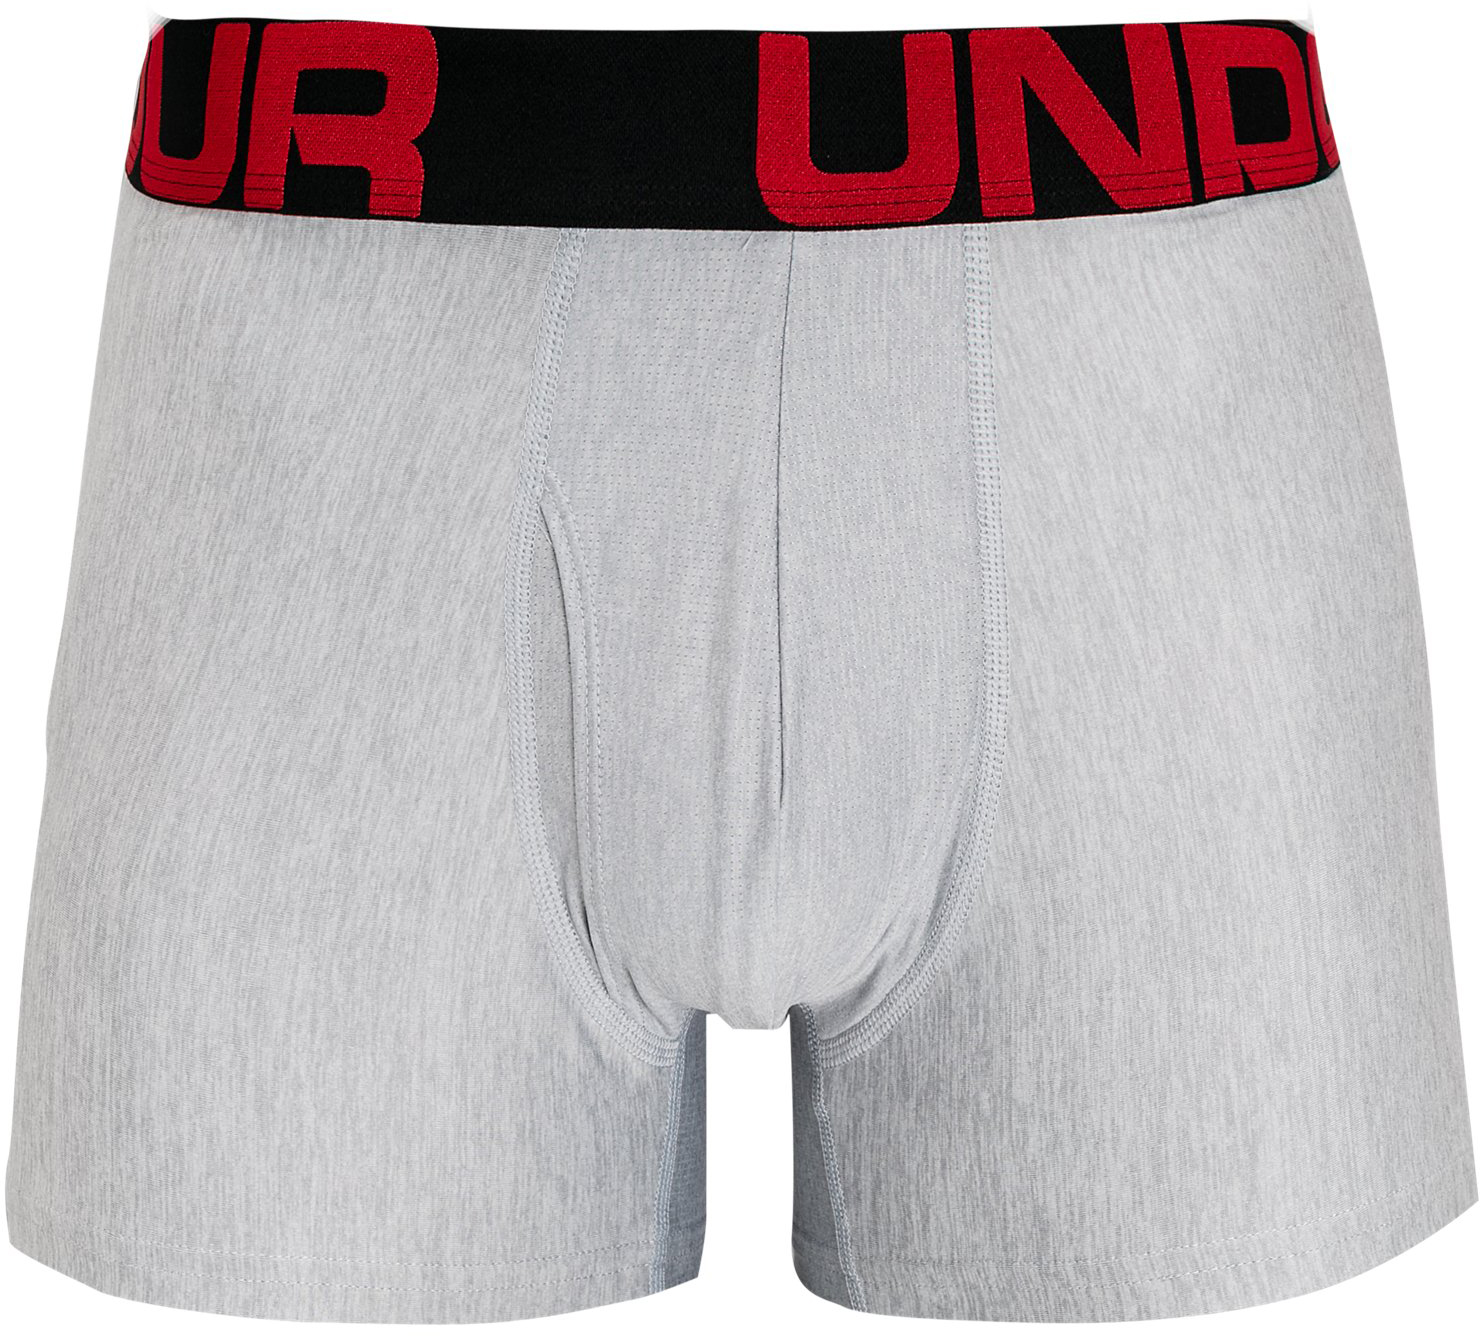 https://op2.0ps.us/original/opplanet-under-armour-ua-tech-3in-boxer-2-pack-mens-mod-gray-light-heather-extra-small-1363618011xs-main